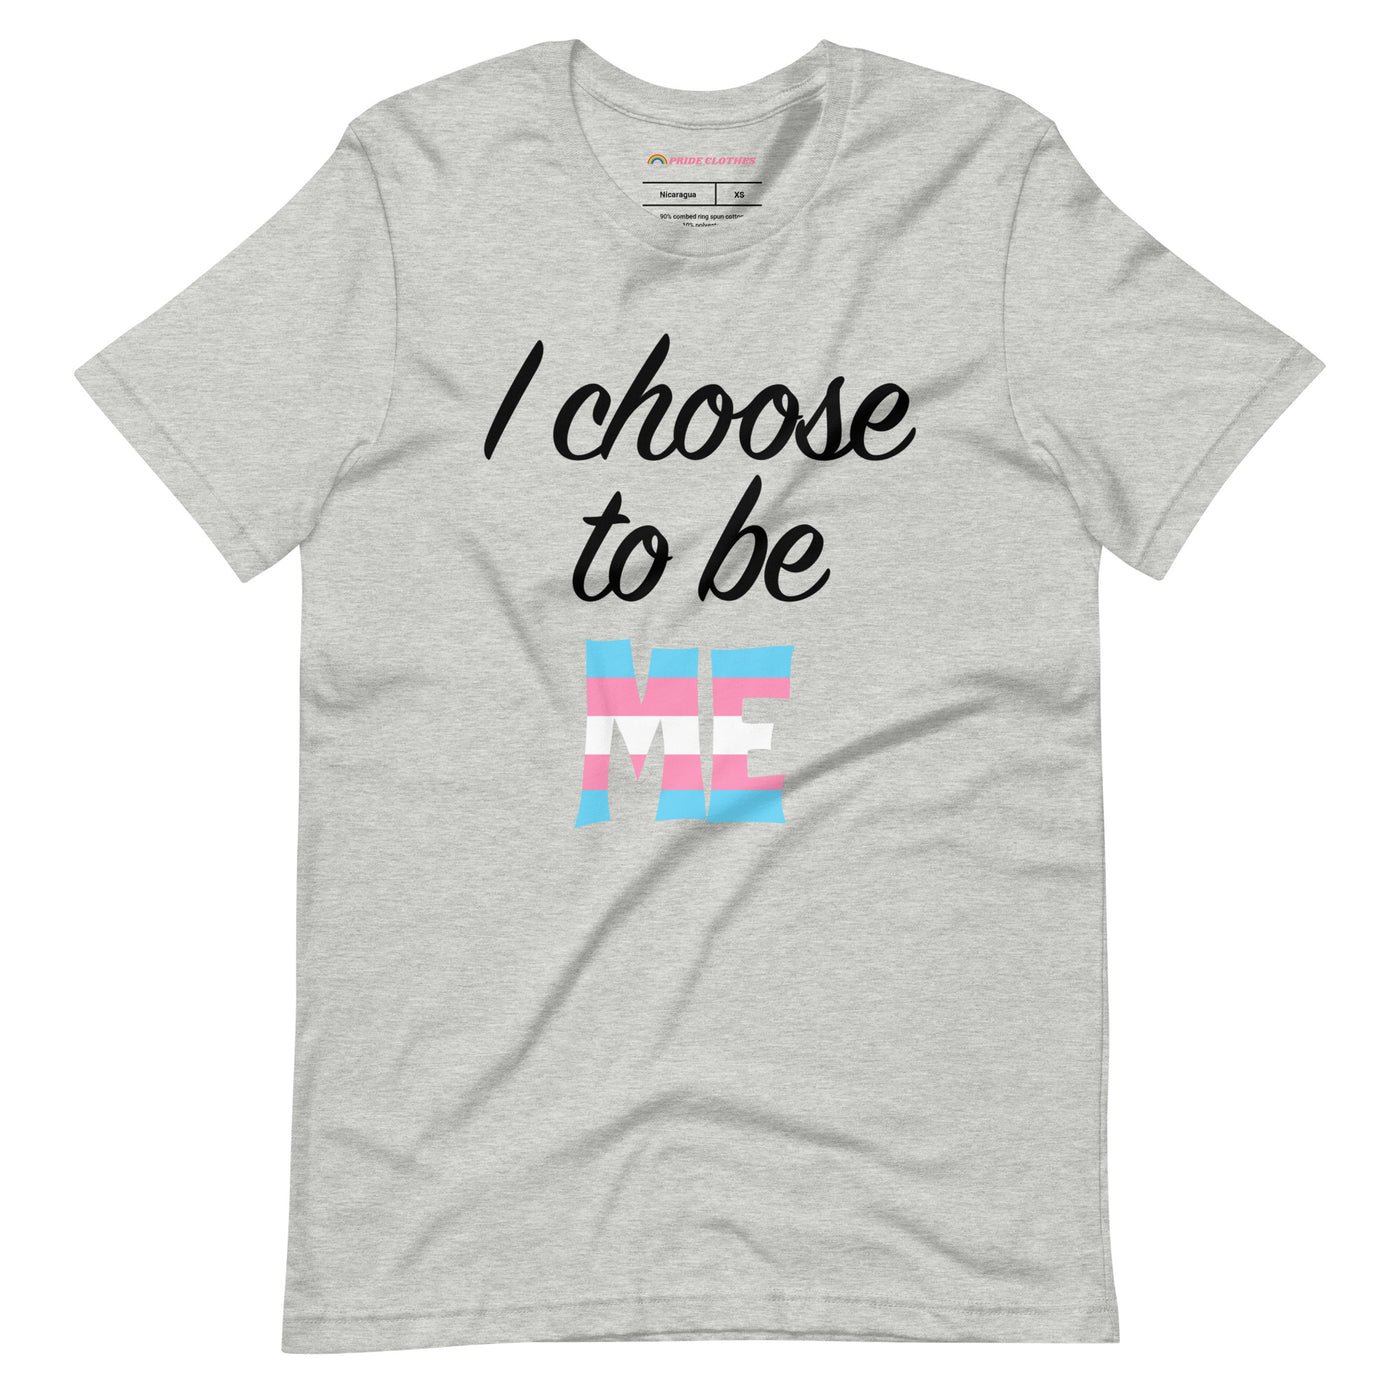 Pride Clothes - Look Here! I Choose to Be Me Trans Pride Flag TShirt - Athletic Heather